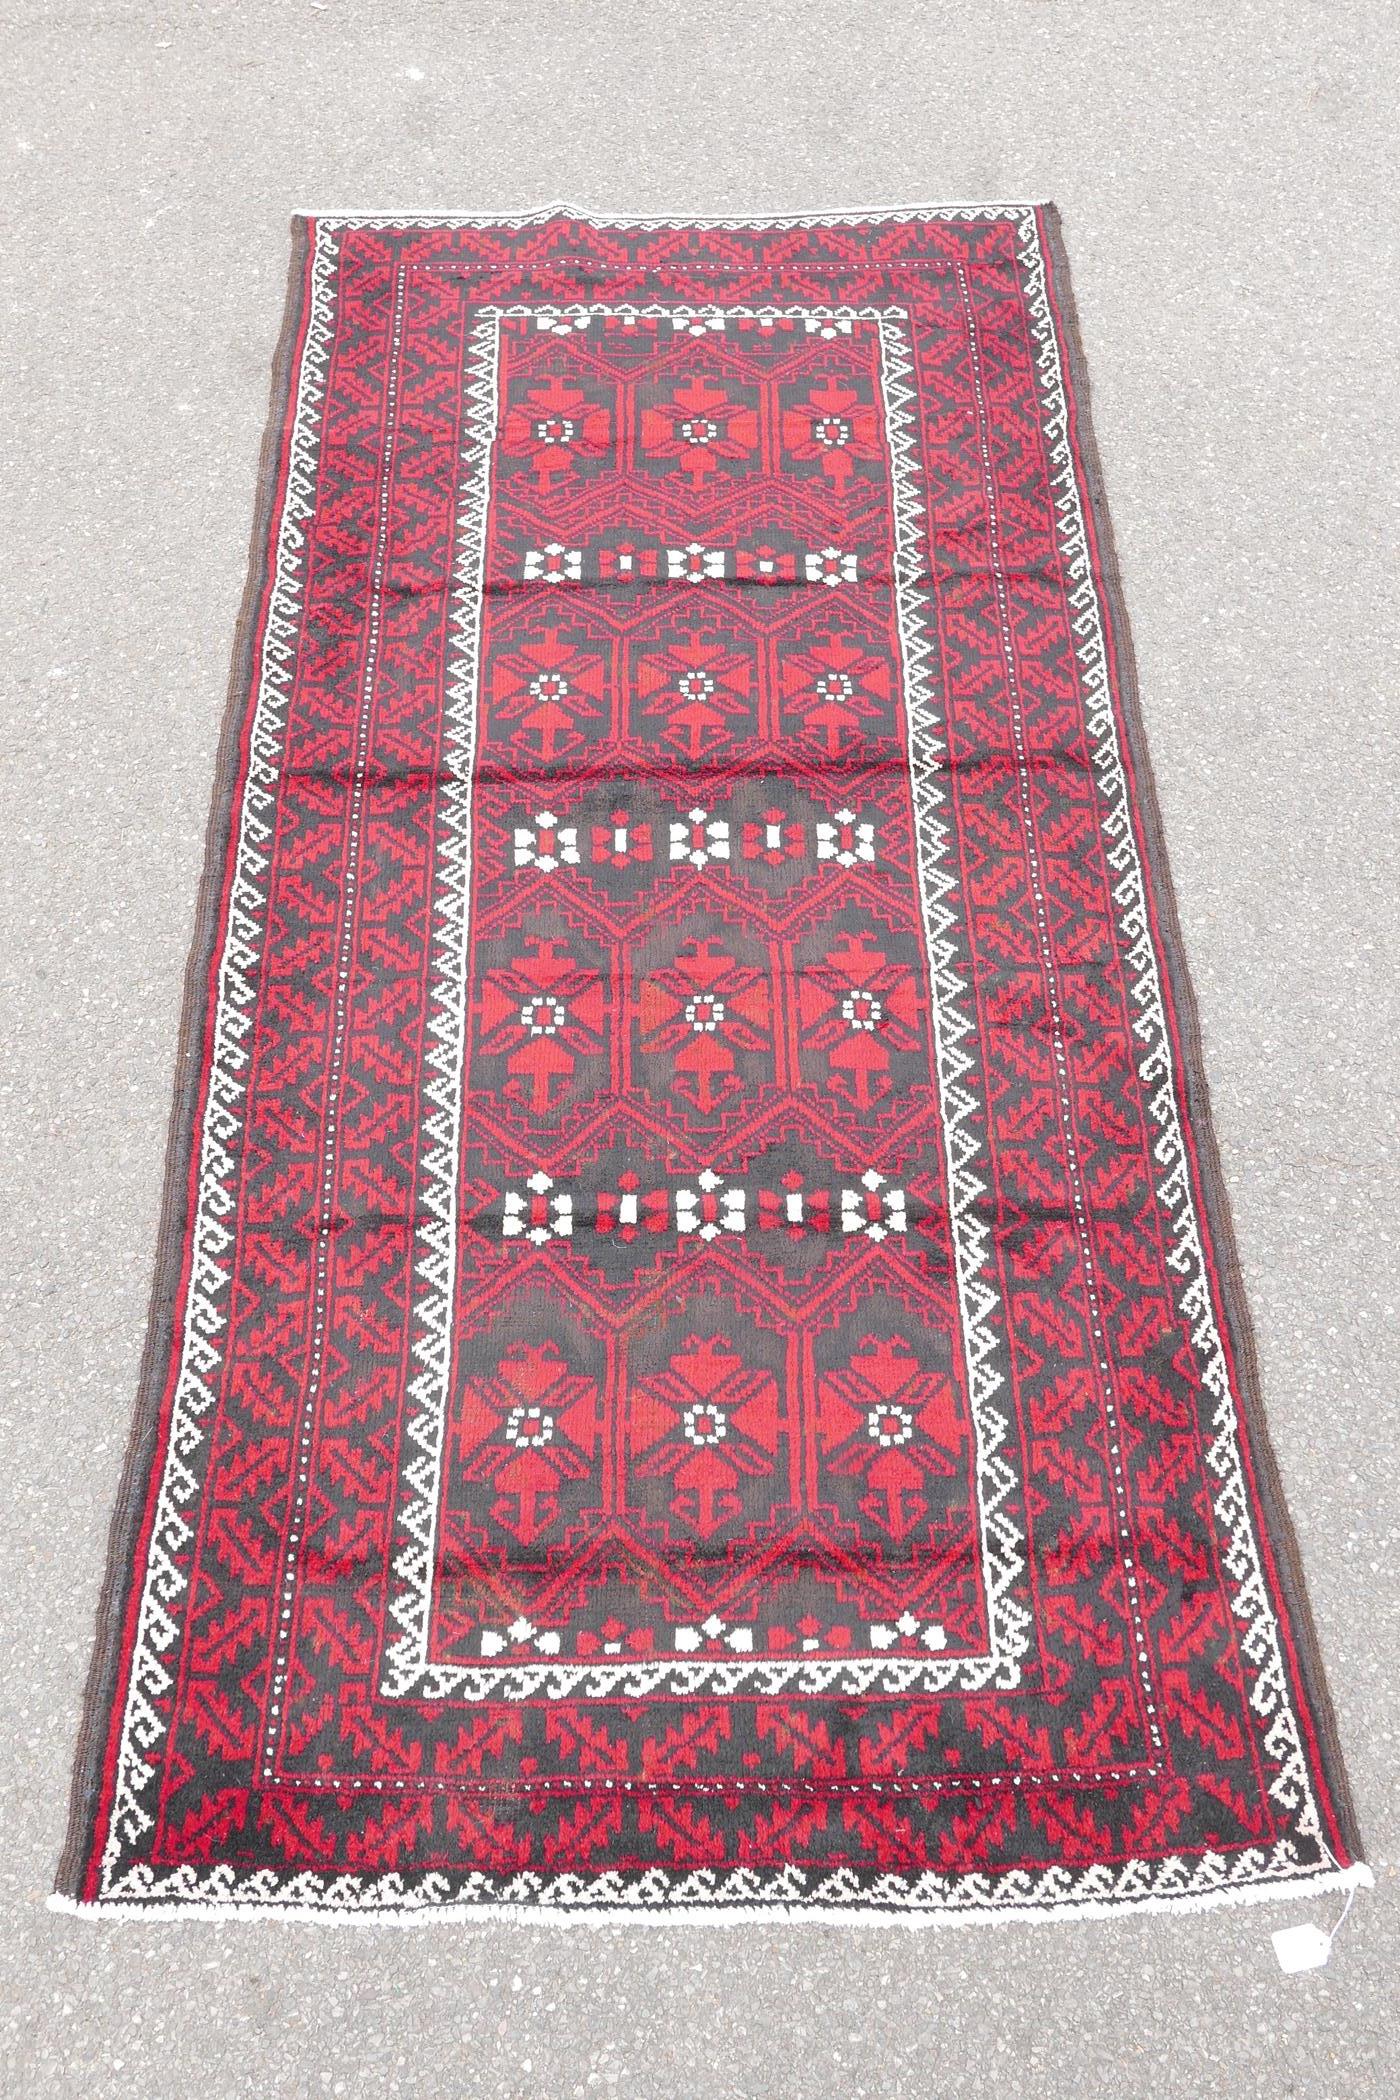 Hand woven full pile red and black ground Iranian Belouch rug, 50½" x 110" - Image 3 of 5